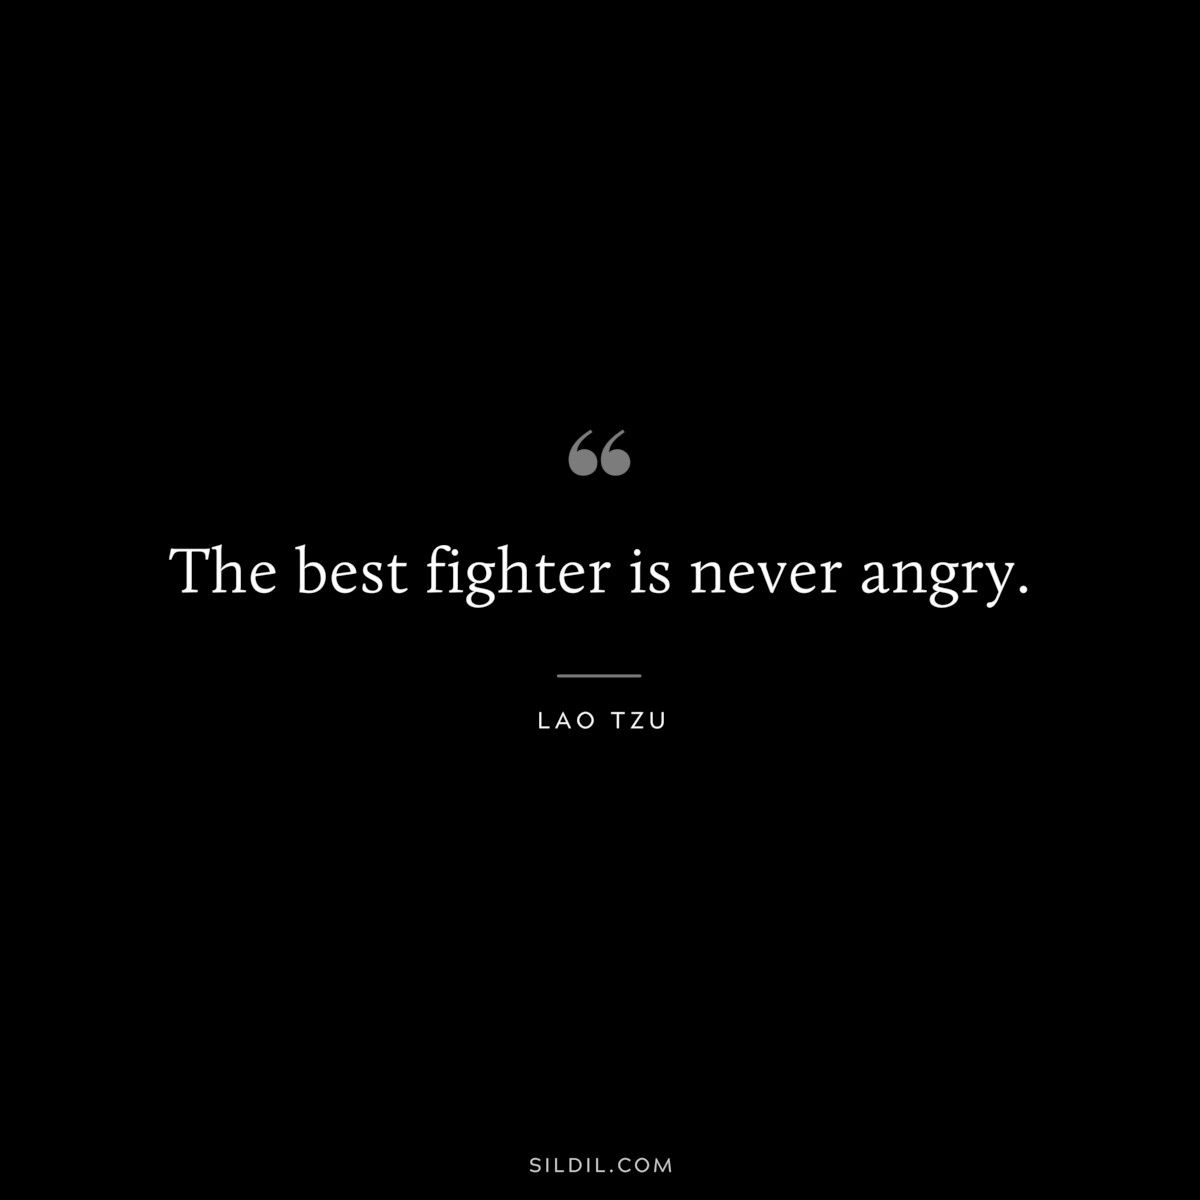 The best fighter is never angry. ― Lao Tzu